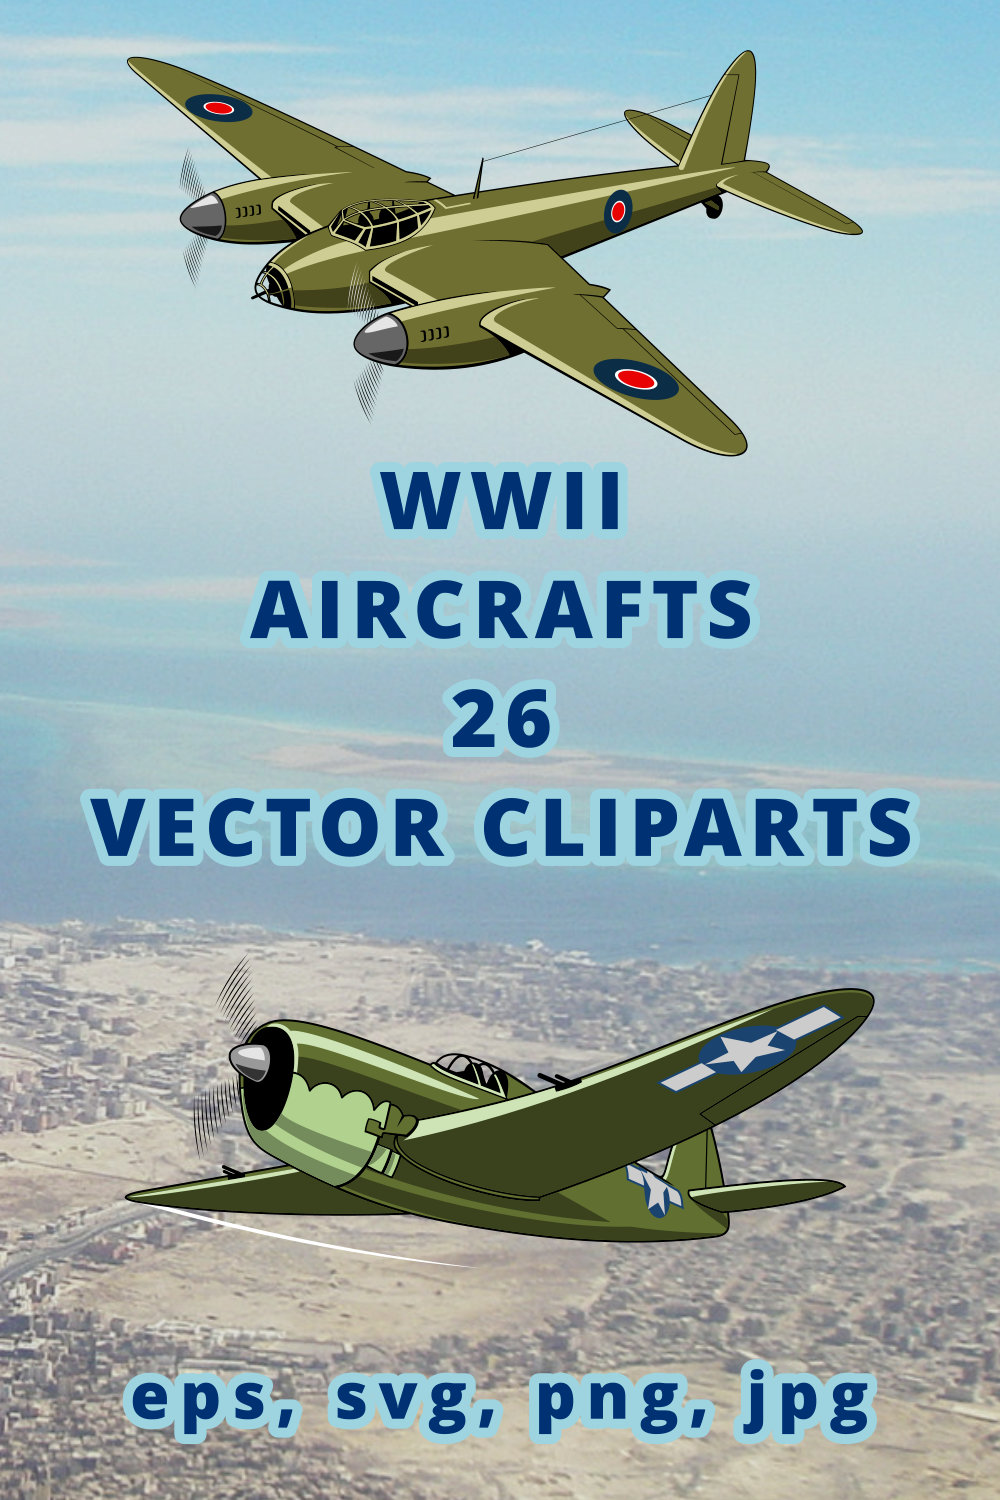 Military Aircrafts cliparts Bundle SVG WW2 fighters and bombers pinterest preview image.